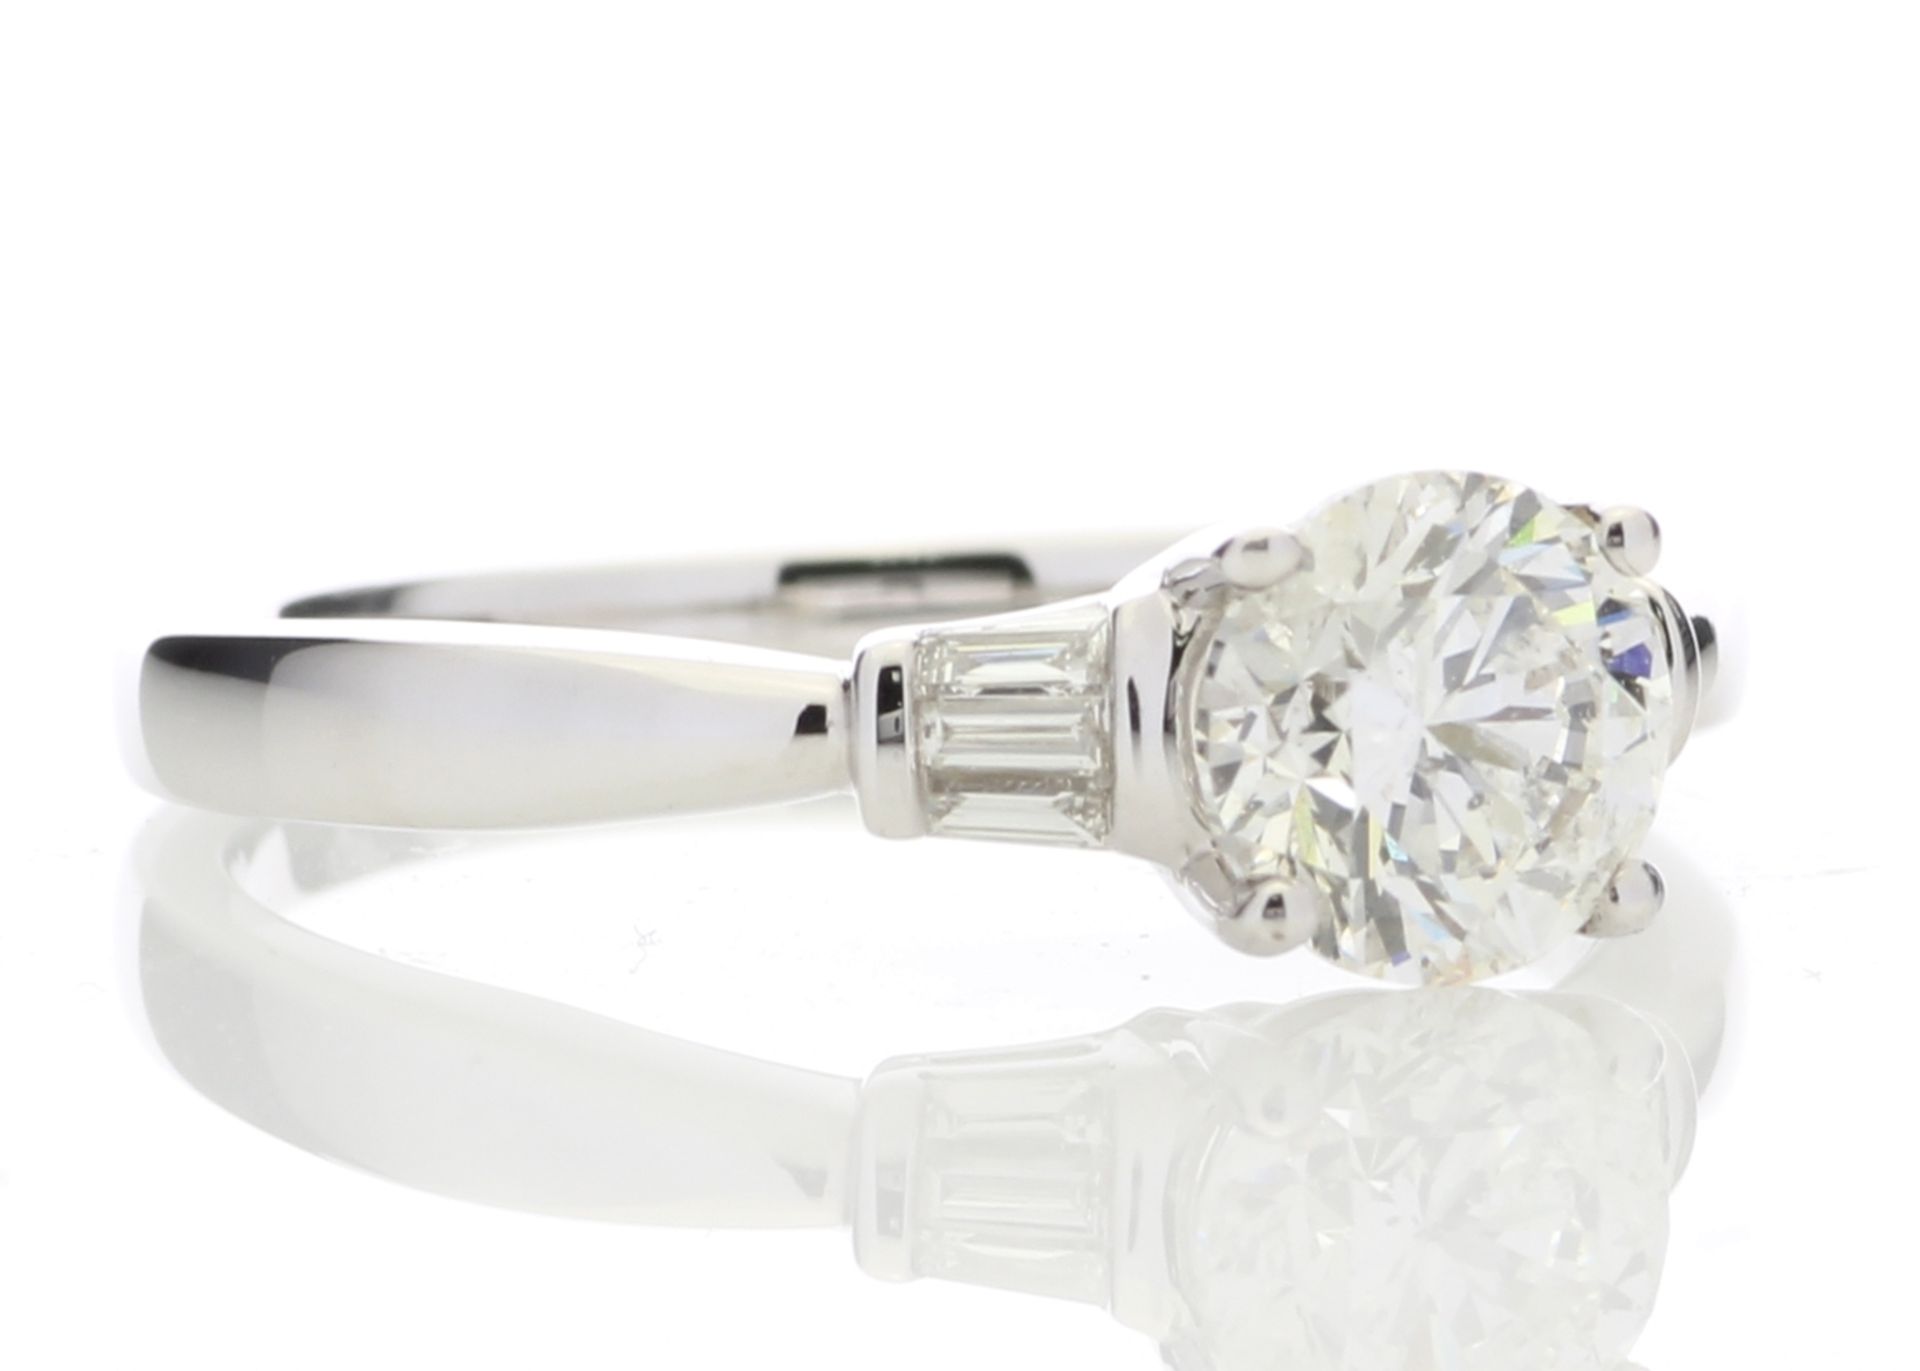 18ct White Gold Diamond Ring With Baguette 1.15 Carats - Valued By GIE £37,300.00 - A beautiful - Image 4 of 5